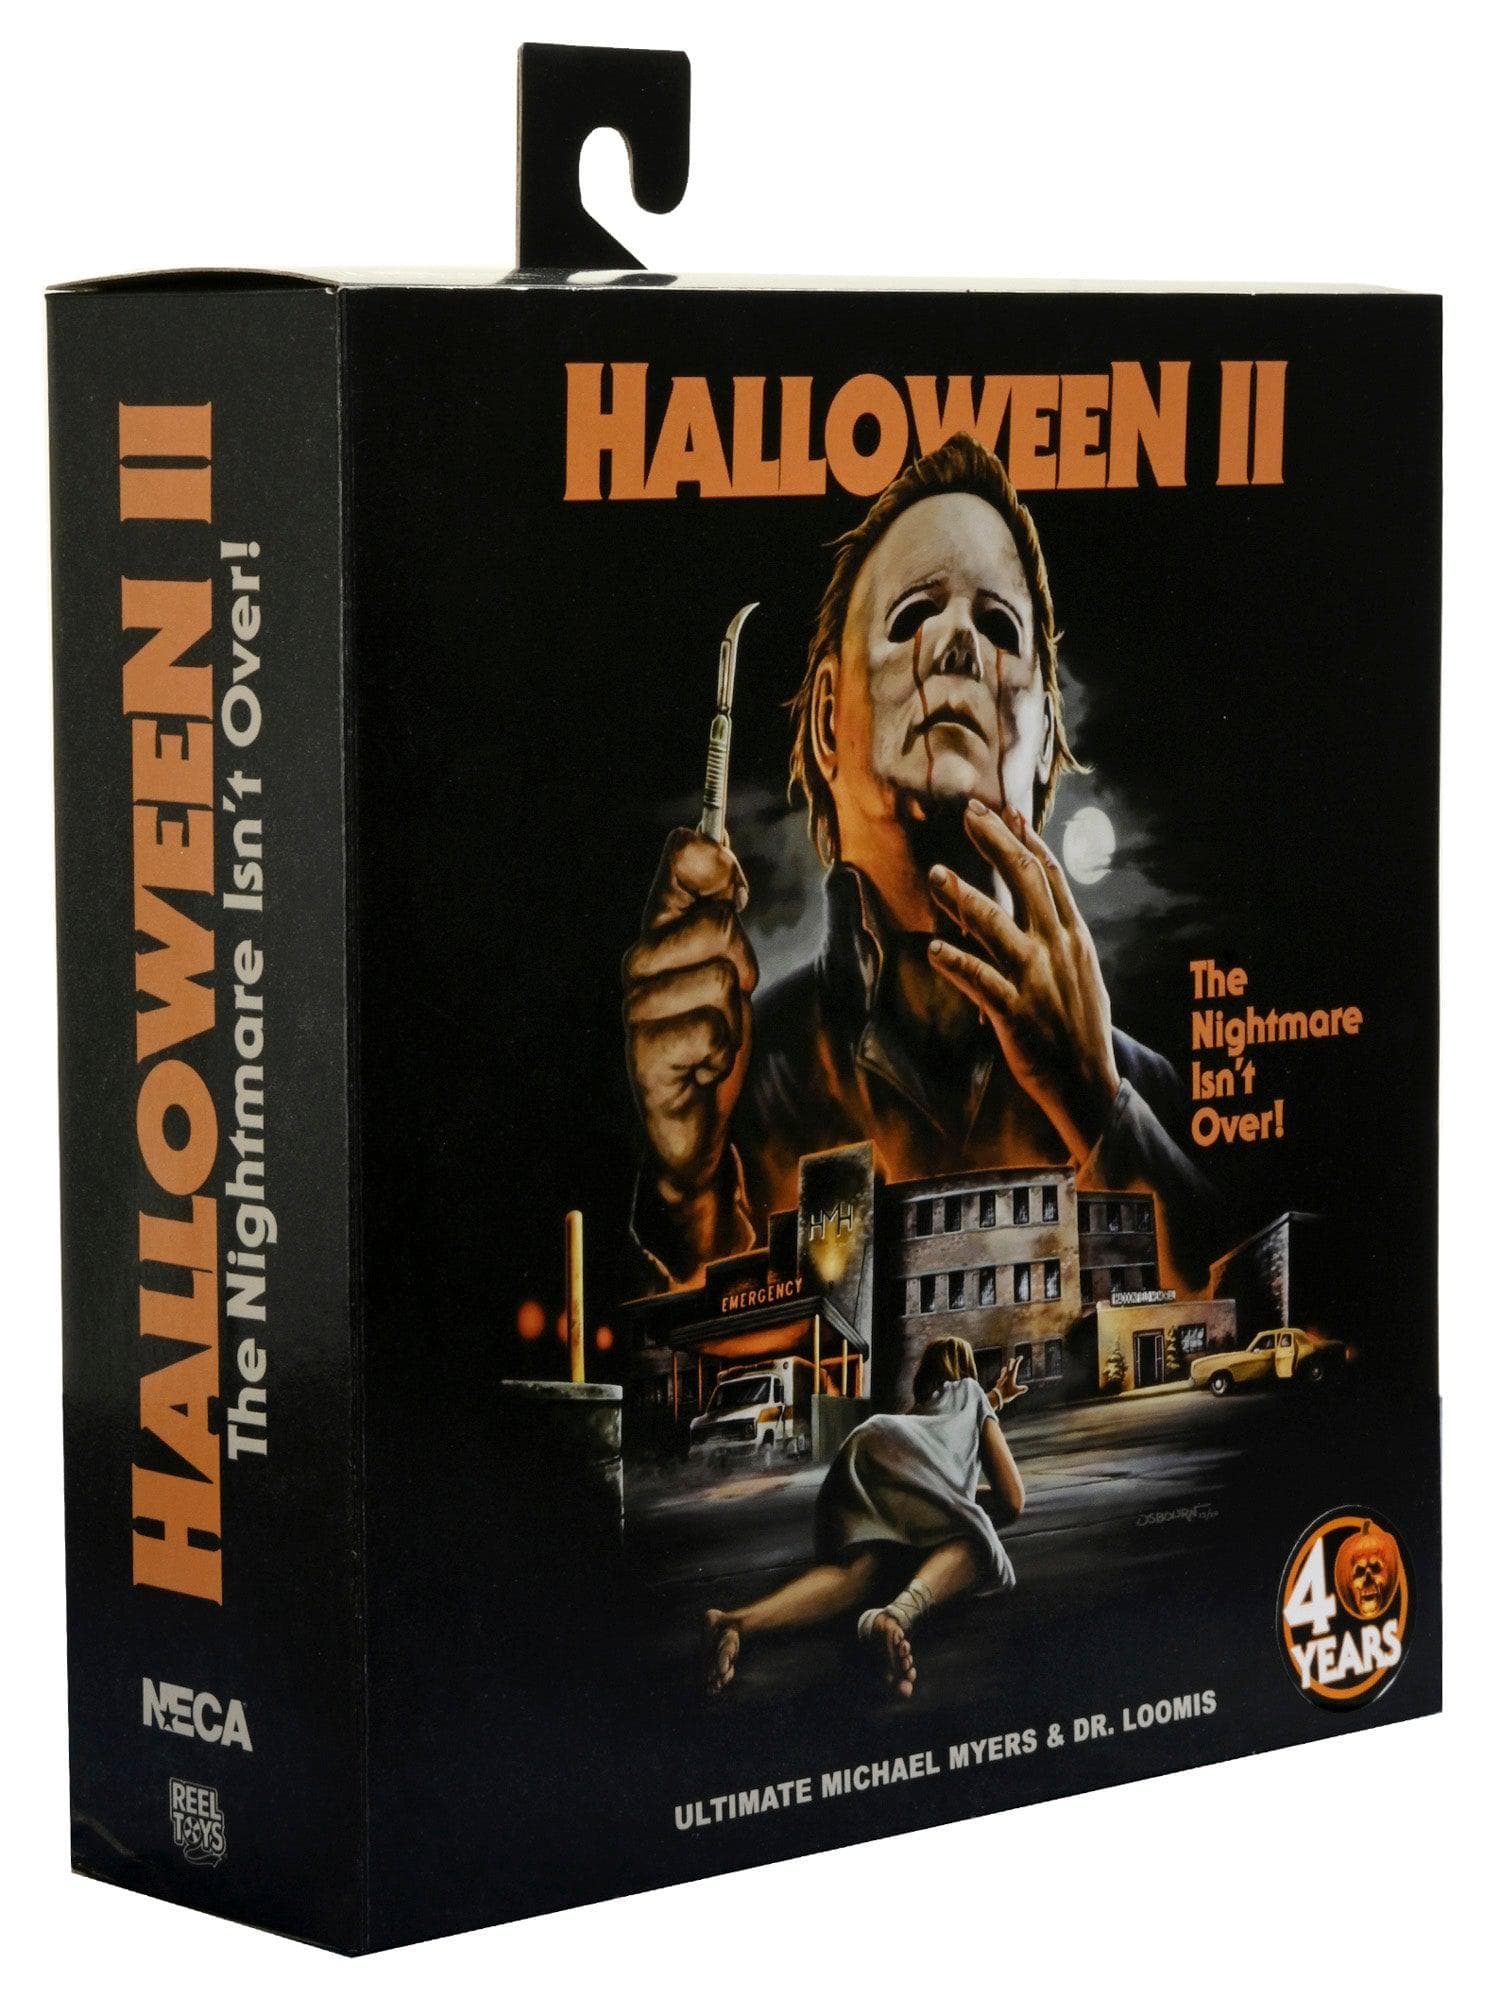 NECA - Halloween 2 - 7" Scale Action Figures - 40th Anniversary Ultimate Myers and Loomis 2 Pack - costumes.com